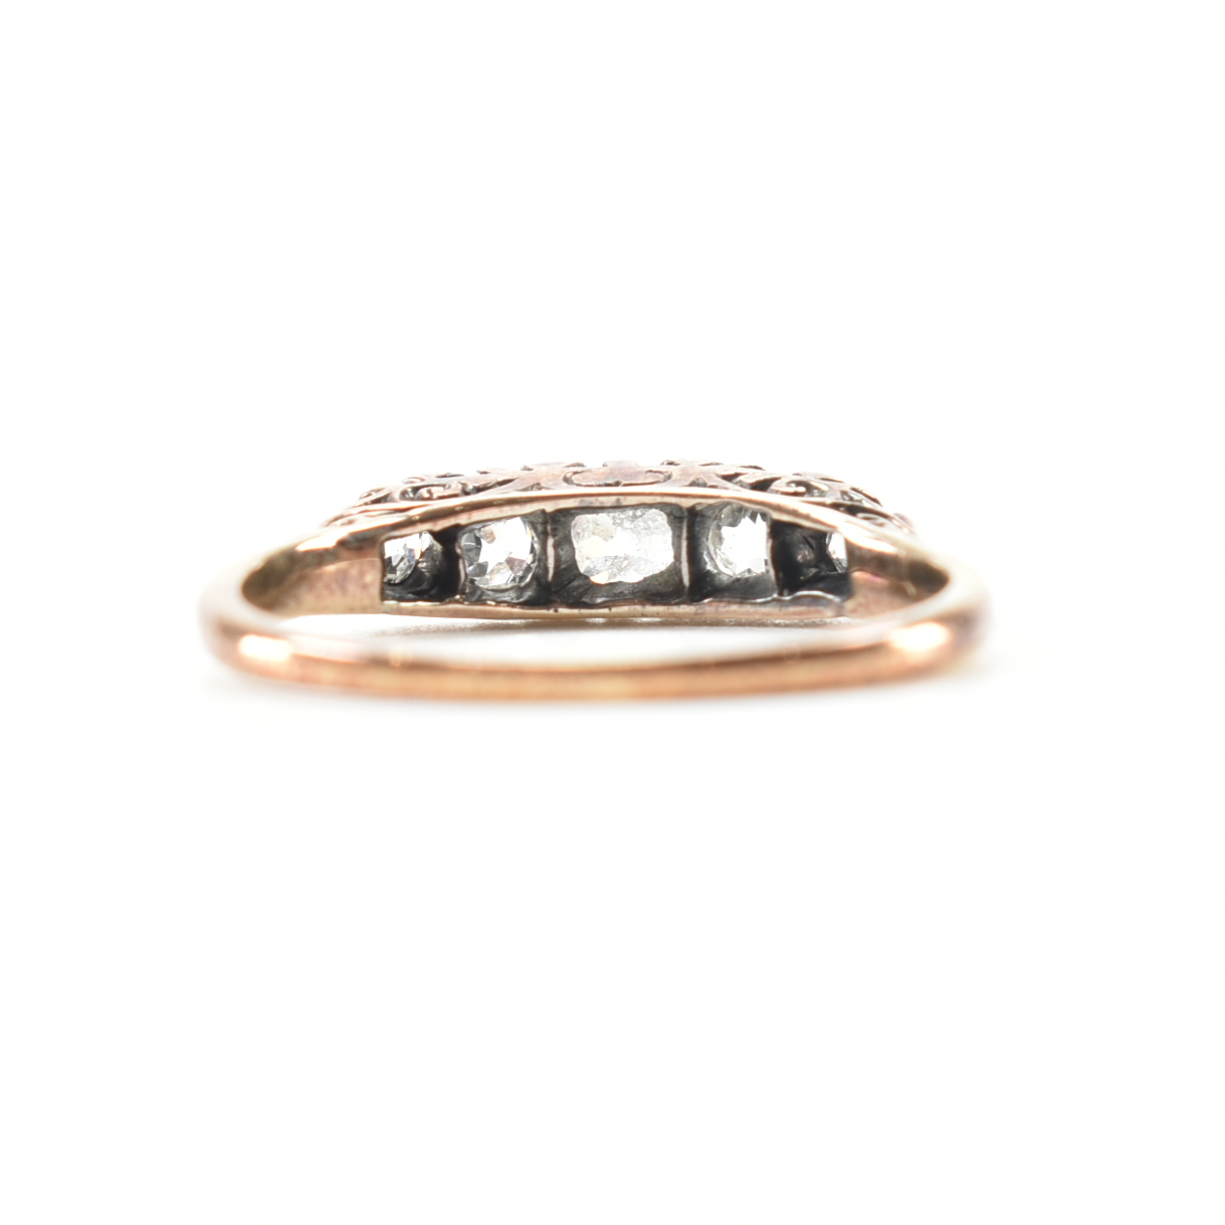 18CT GOLD FIVE STONE DIAMOND RING - Image 4 of 9